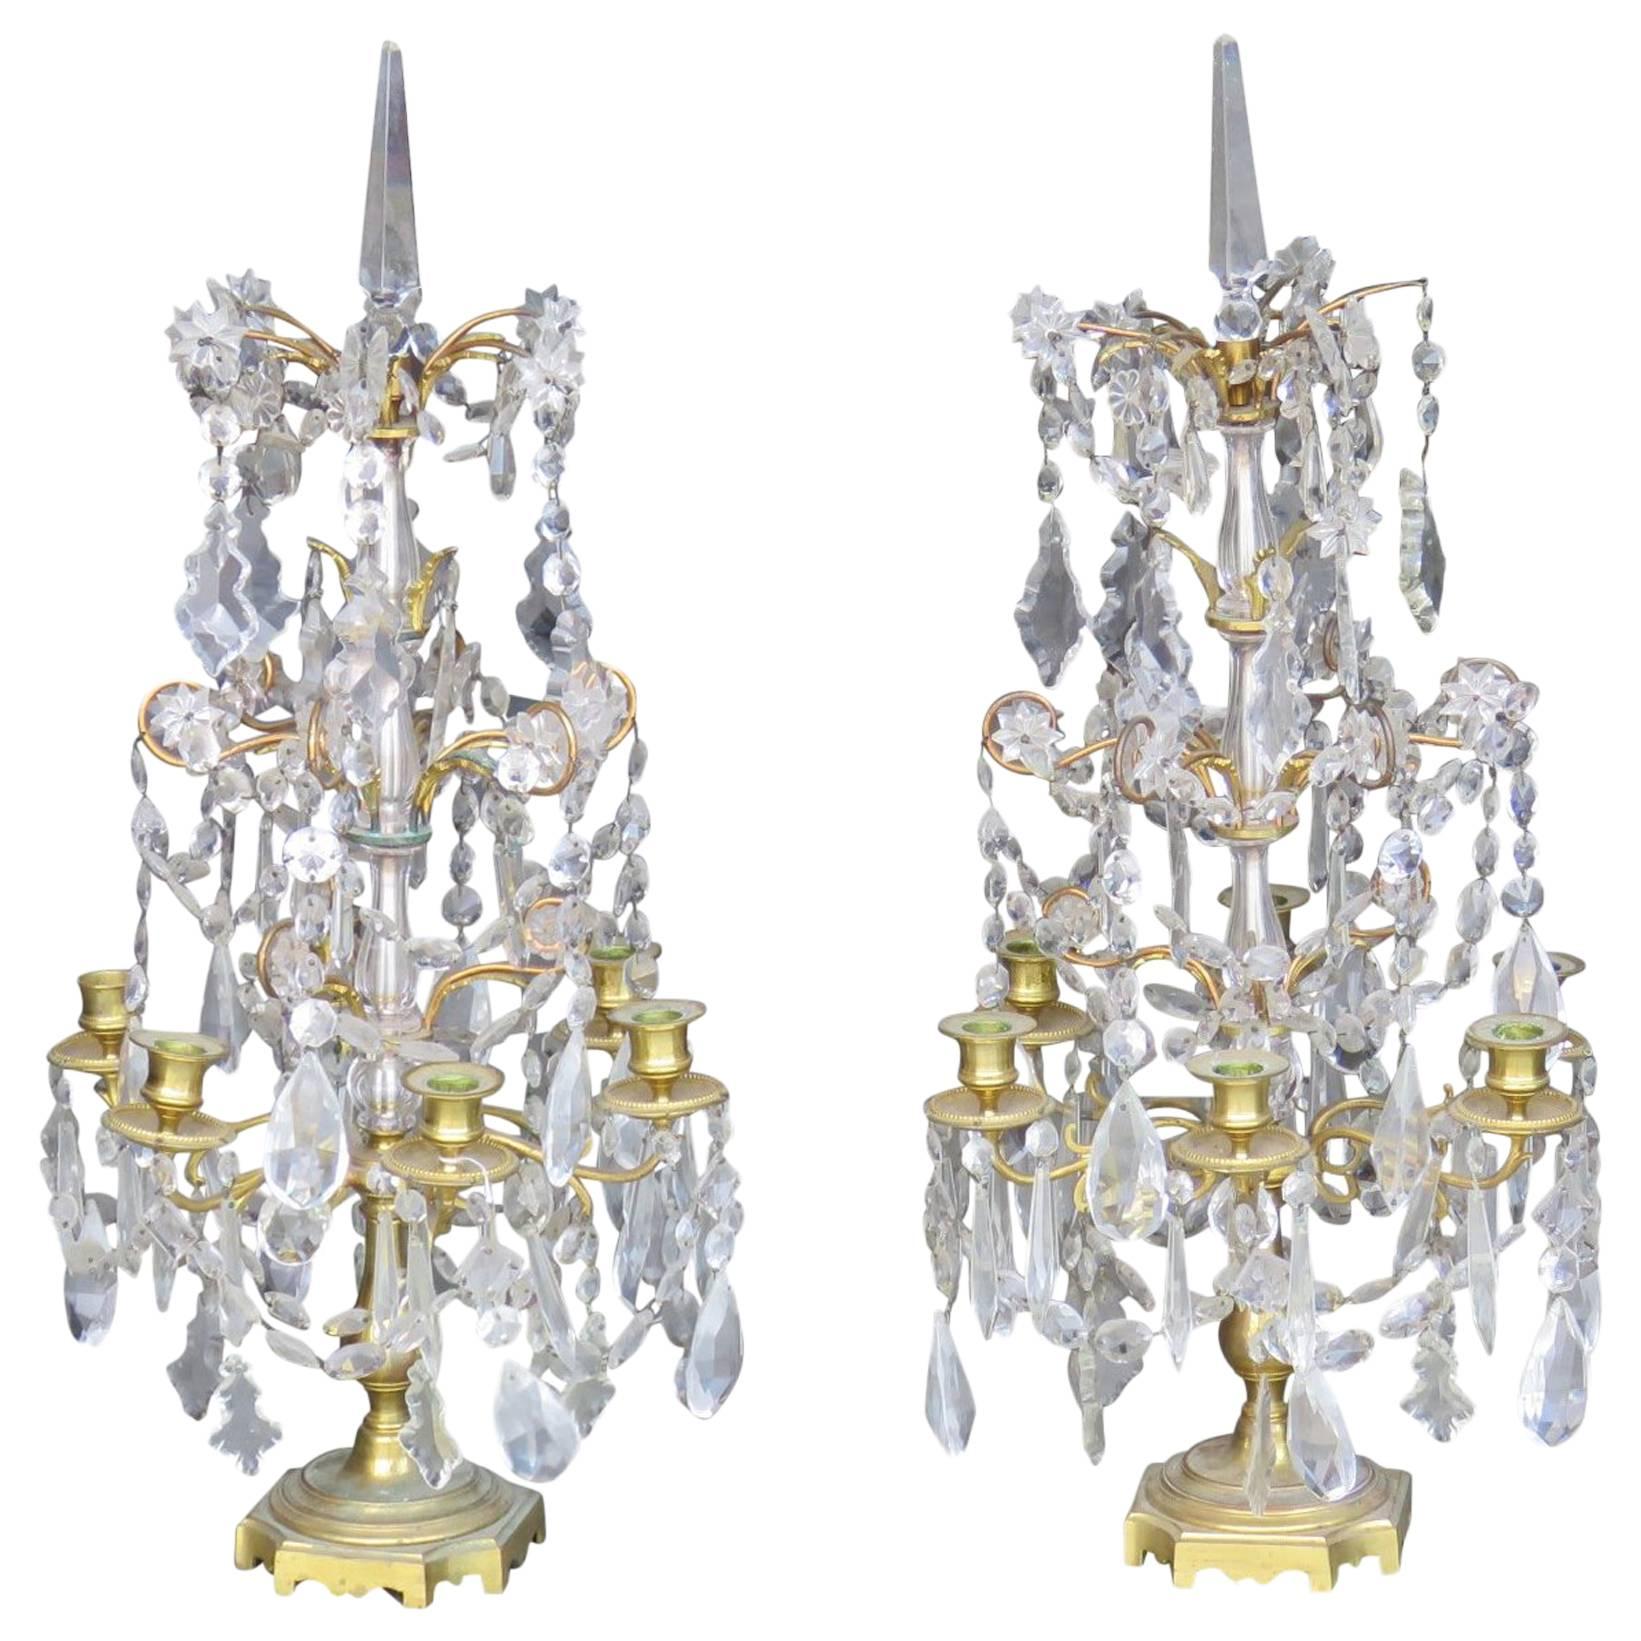 Pair of Regency Style Brass and Prism Candelabras